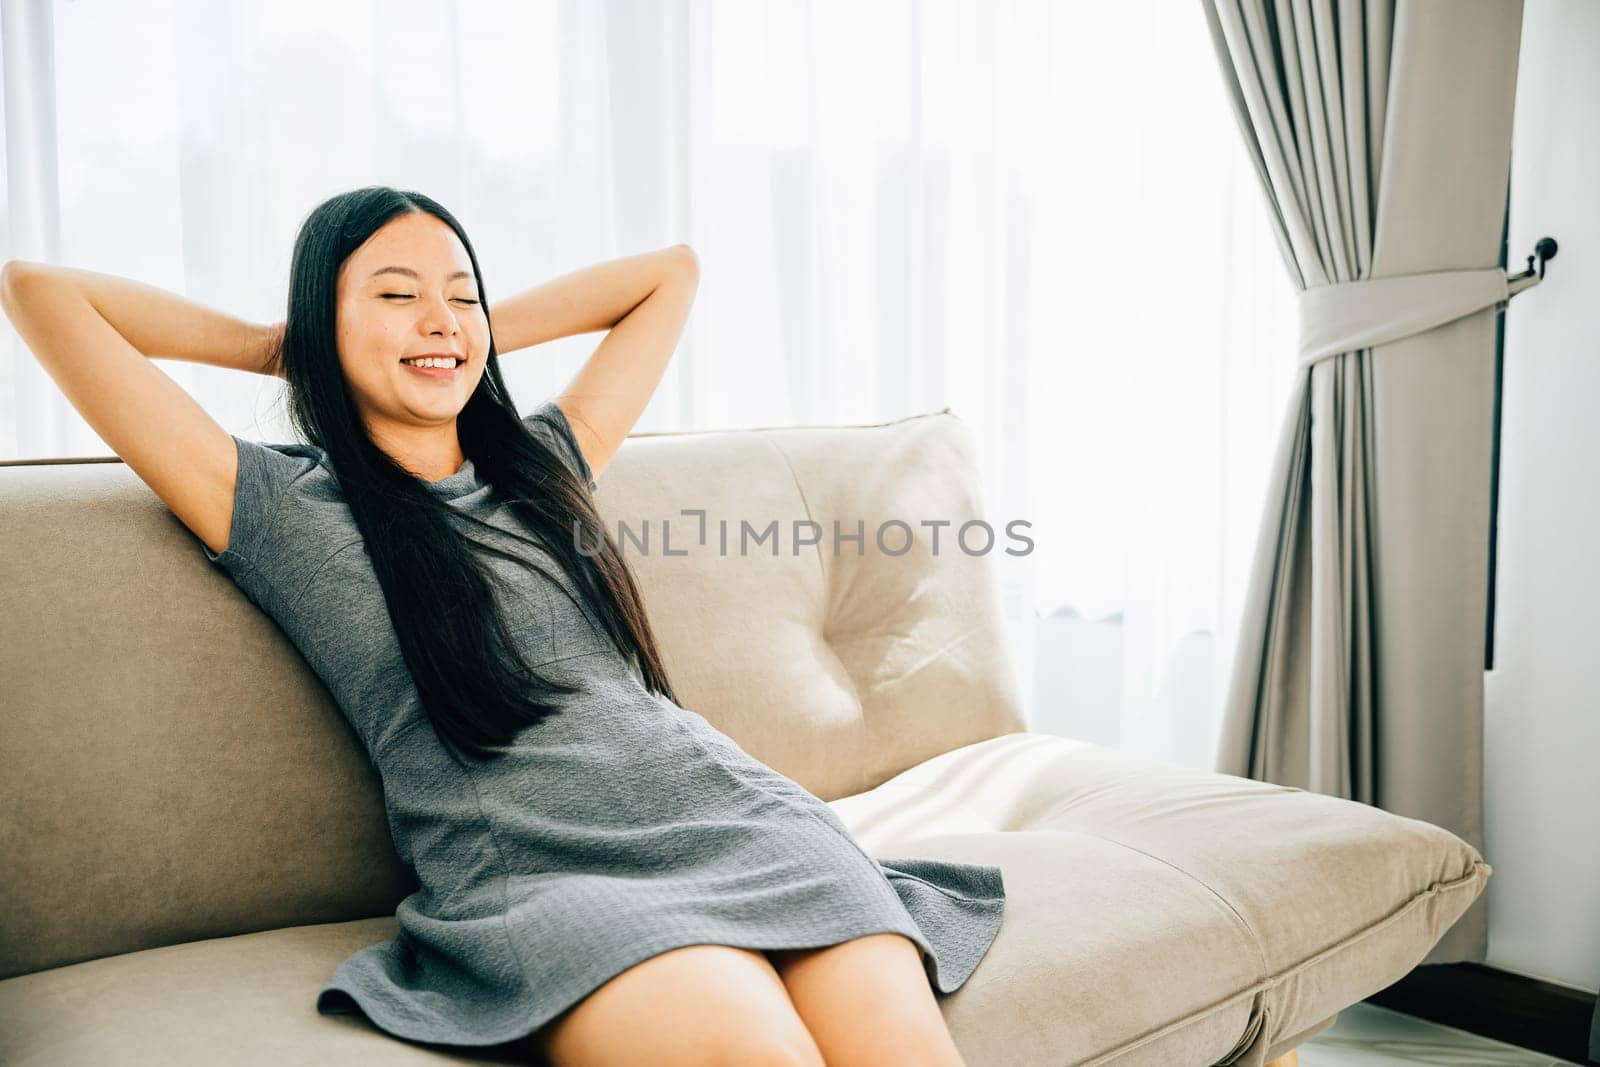 Relaxed woman on sofa hands behind head enjoys serene moment by Sorapop